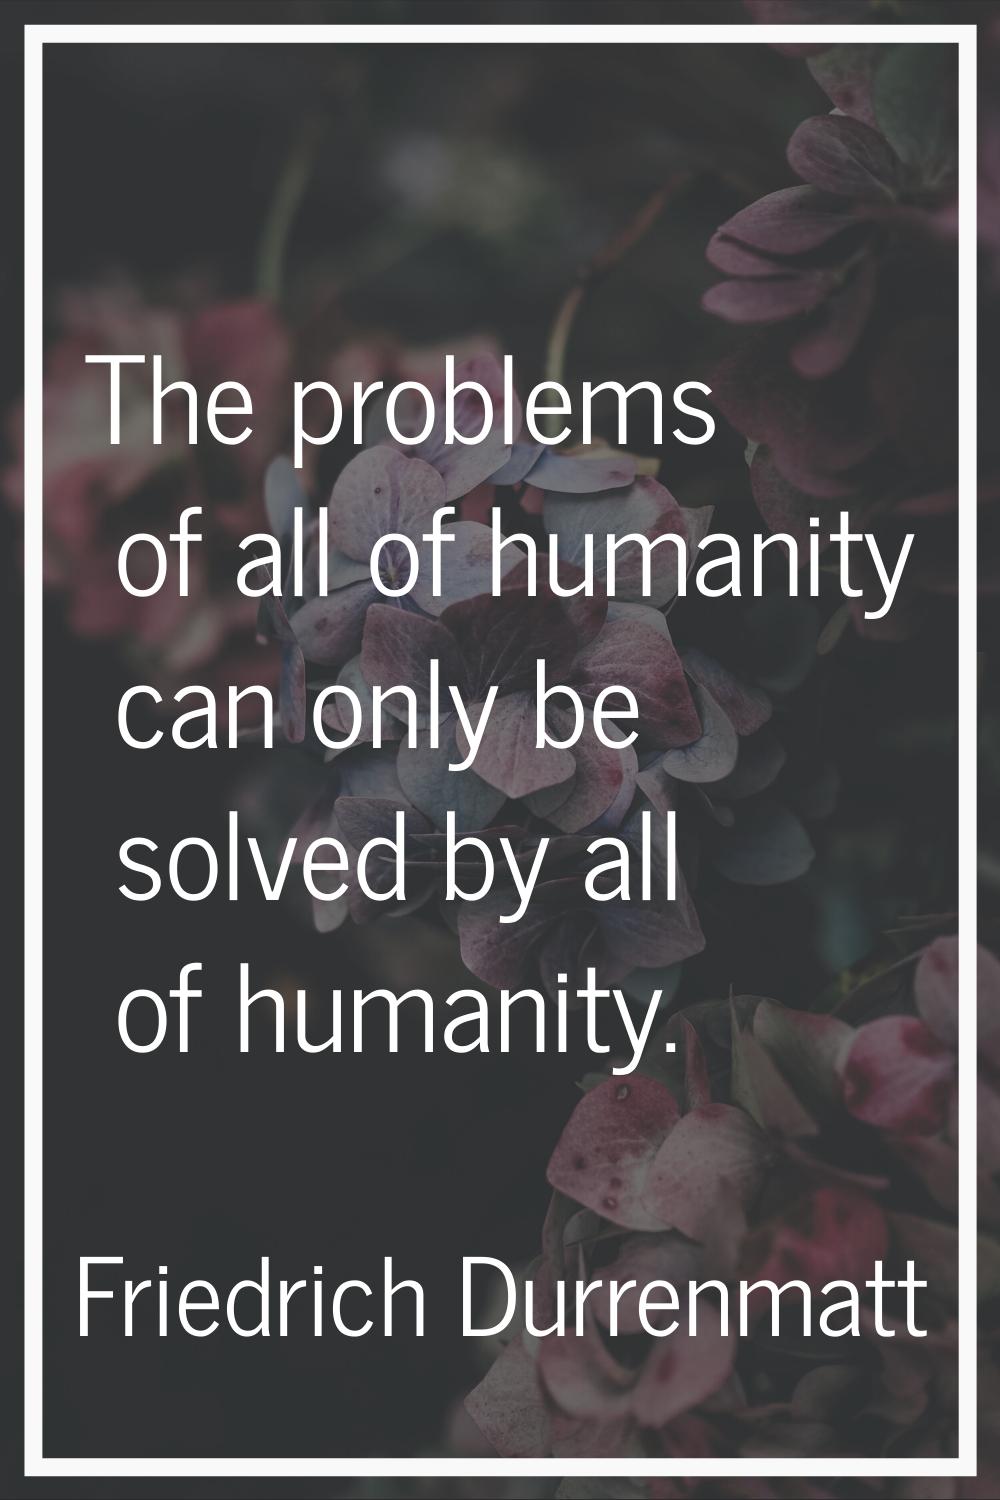 The problems of all of humanity can only be solved by all of humanity.